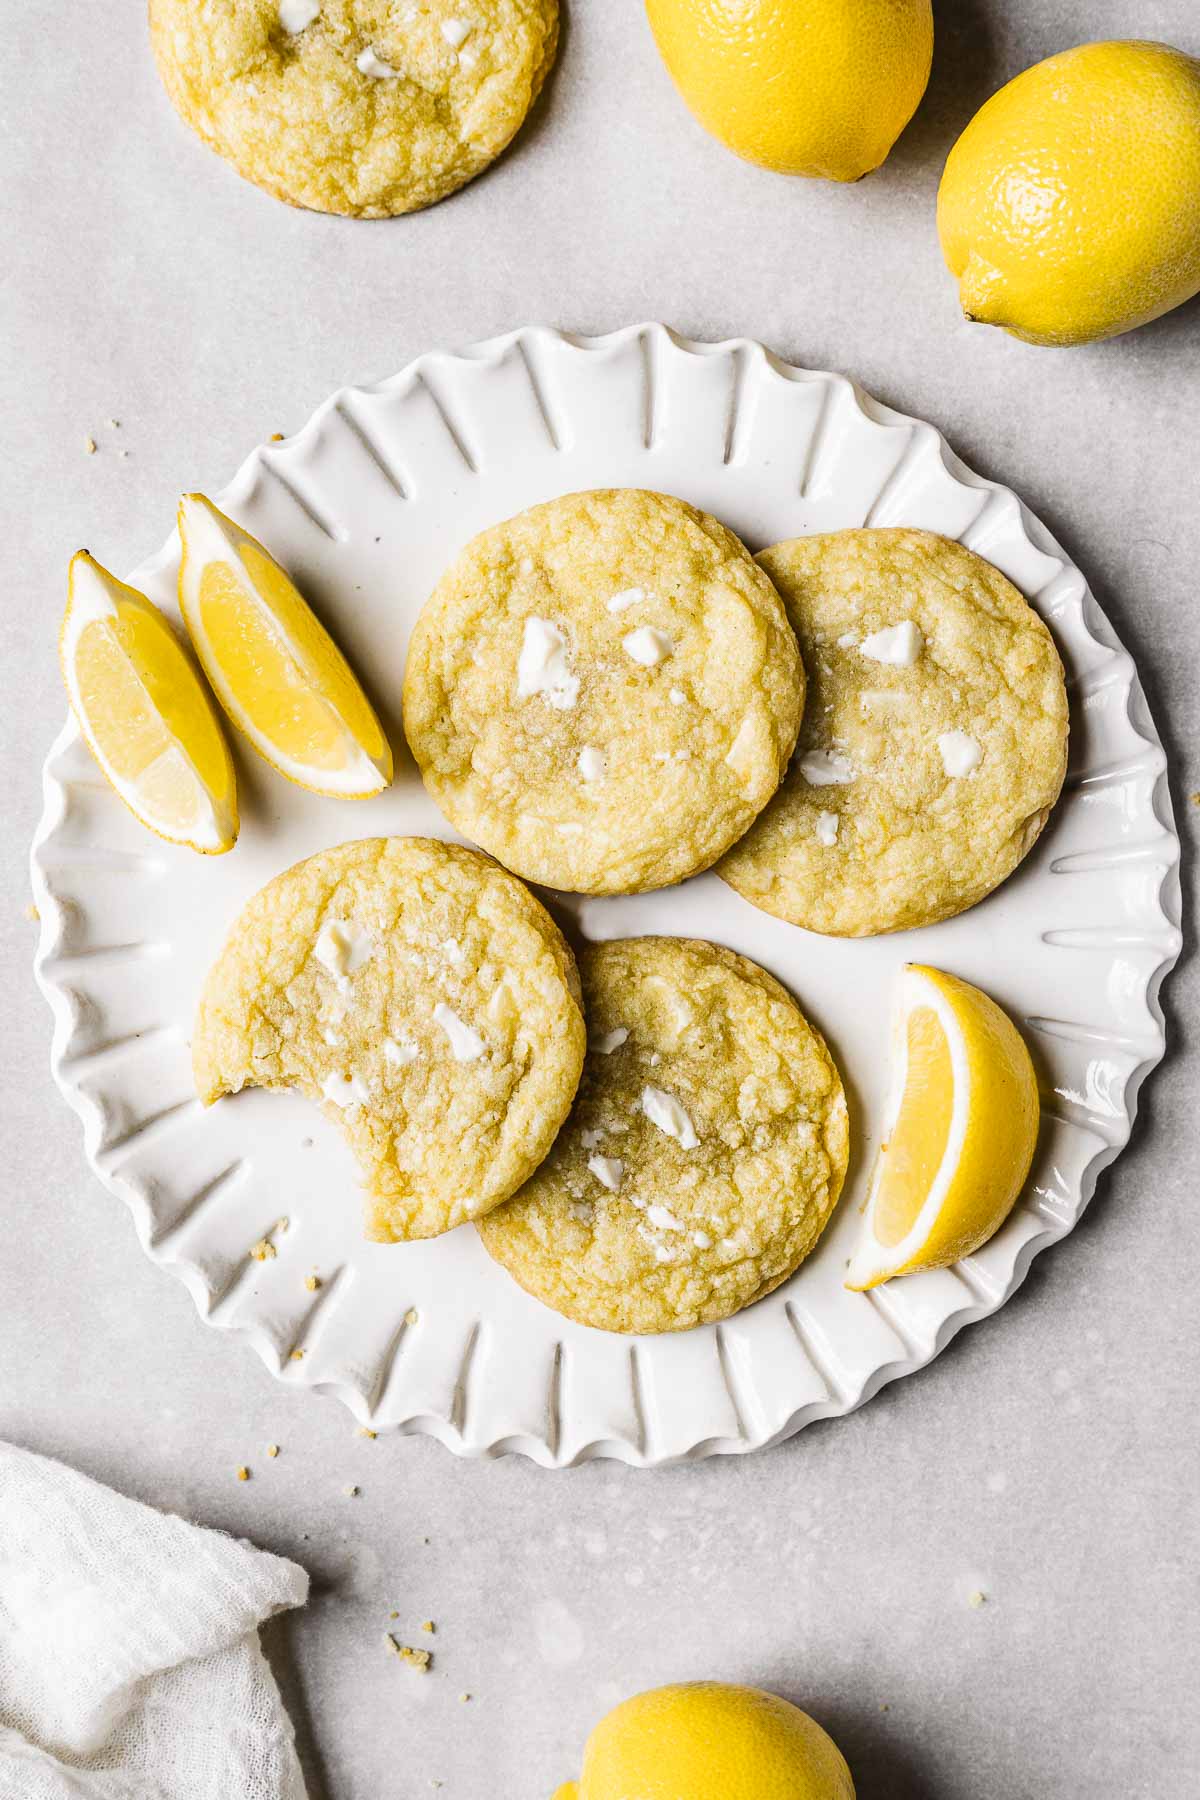 Four lemon white chocolate cookies on a white fluted ceramic plate surrounded by slices of lemons, whole lemons, and another cookie.